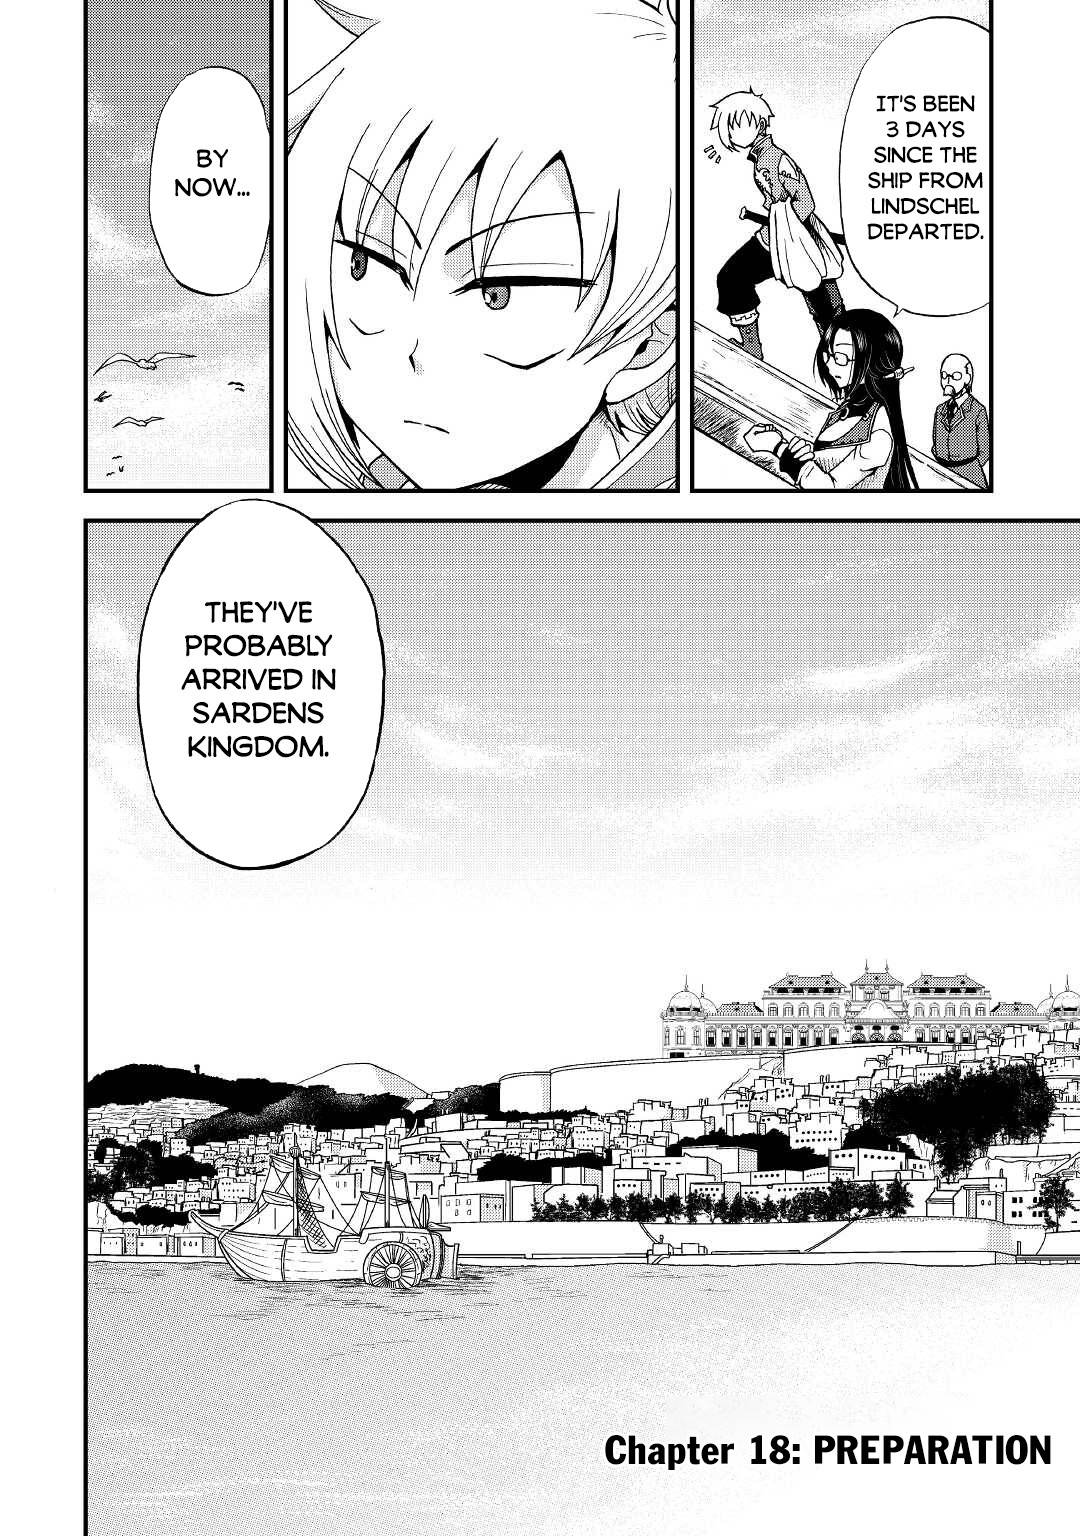 Previous Life Was Sword Emperor. This Life Is Trash Prince. - chapter 18 - #3